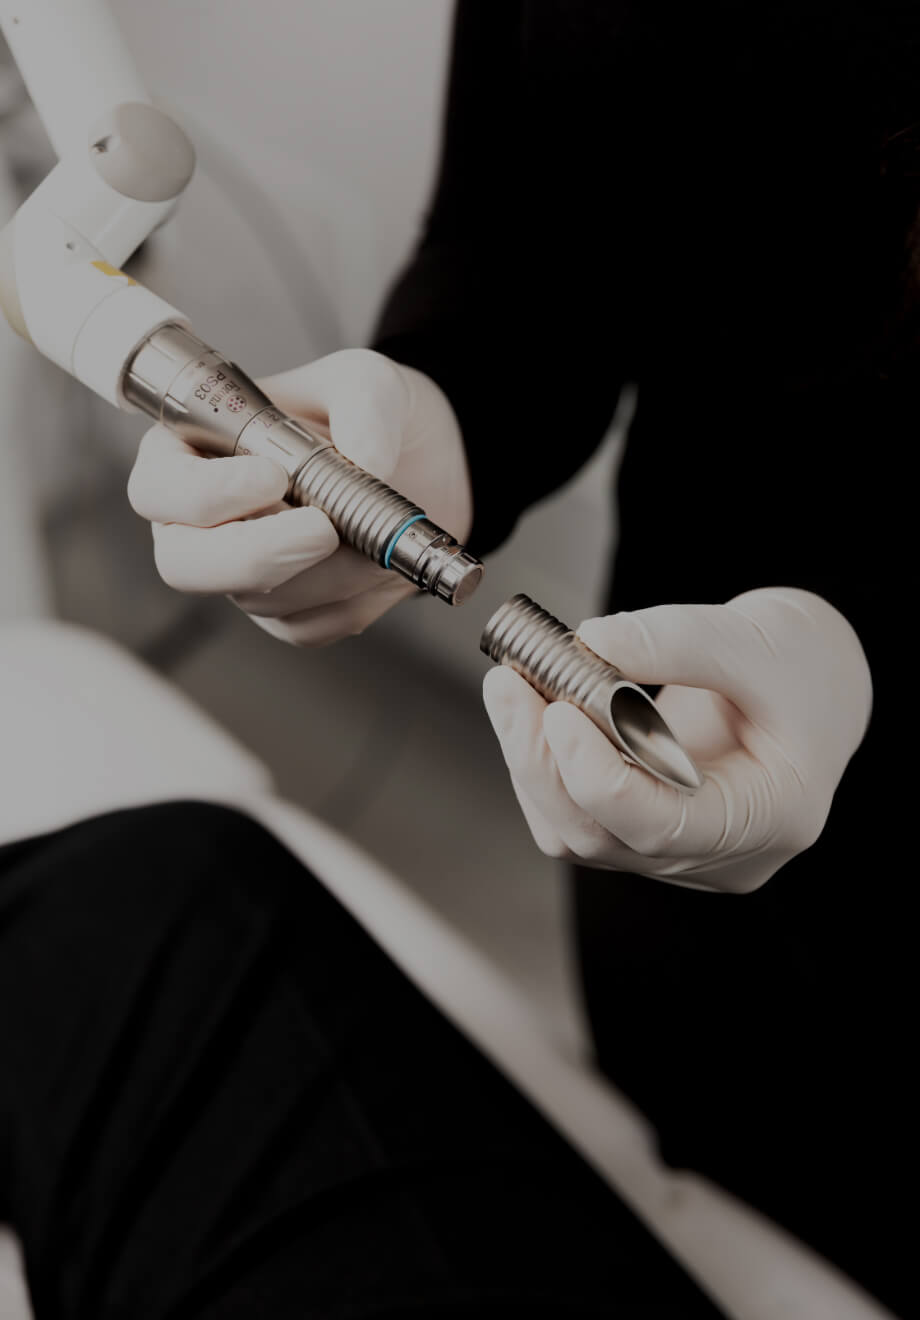 A Clinique Chloé medico-aesthetic technician holding the NightLase laser handpiece and installing a special tip on it